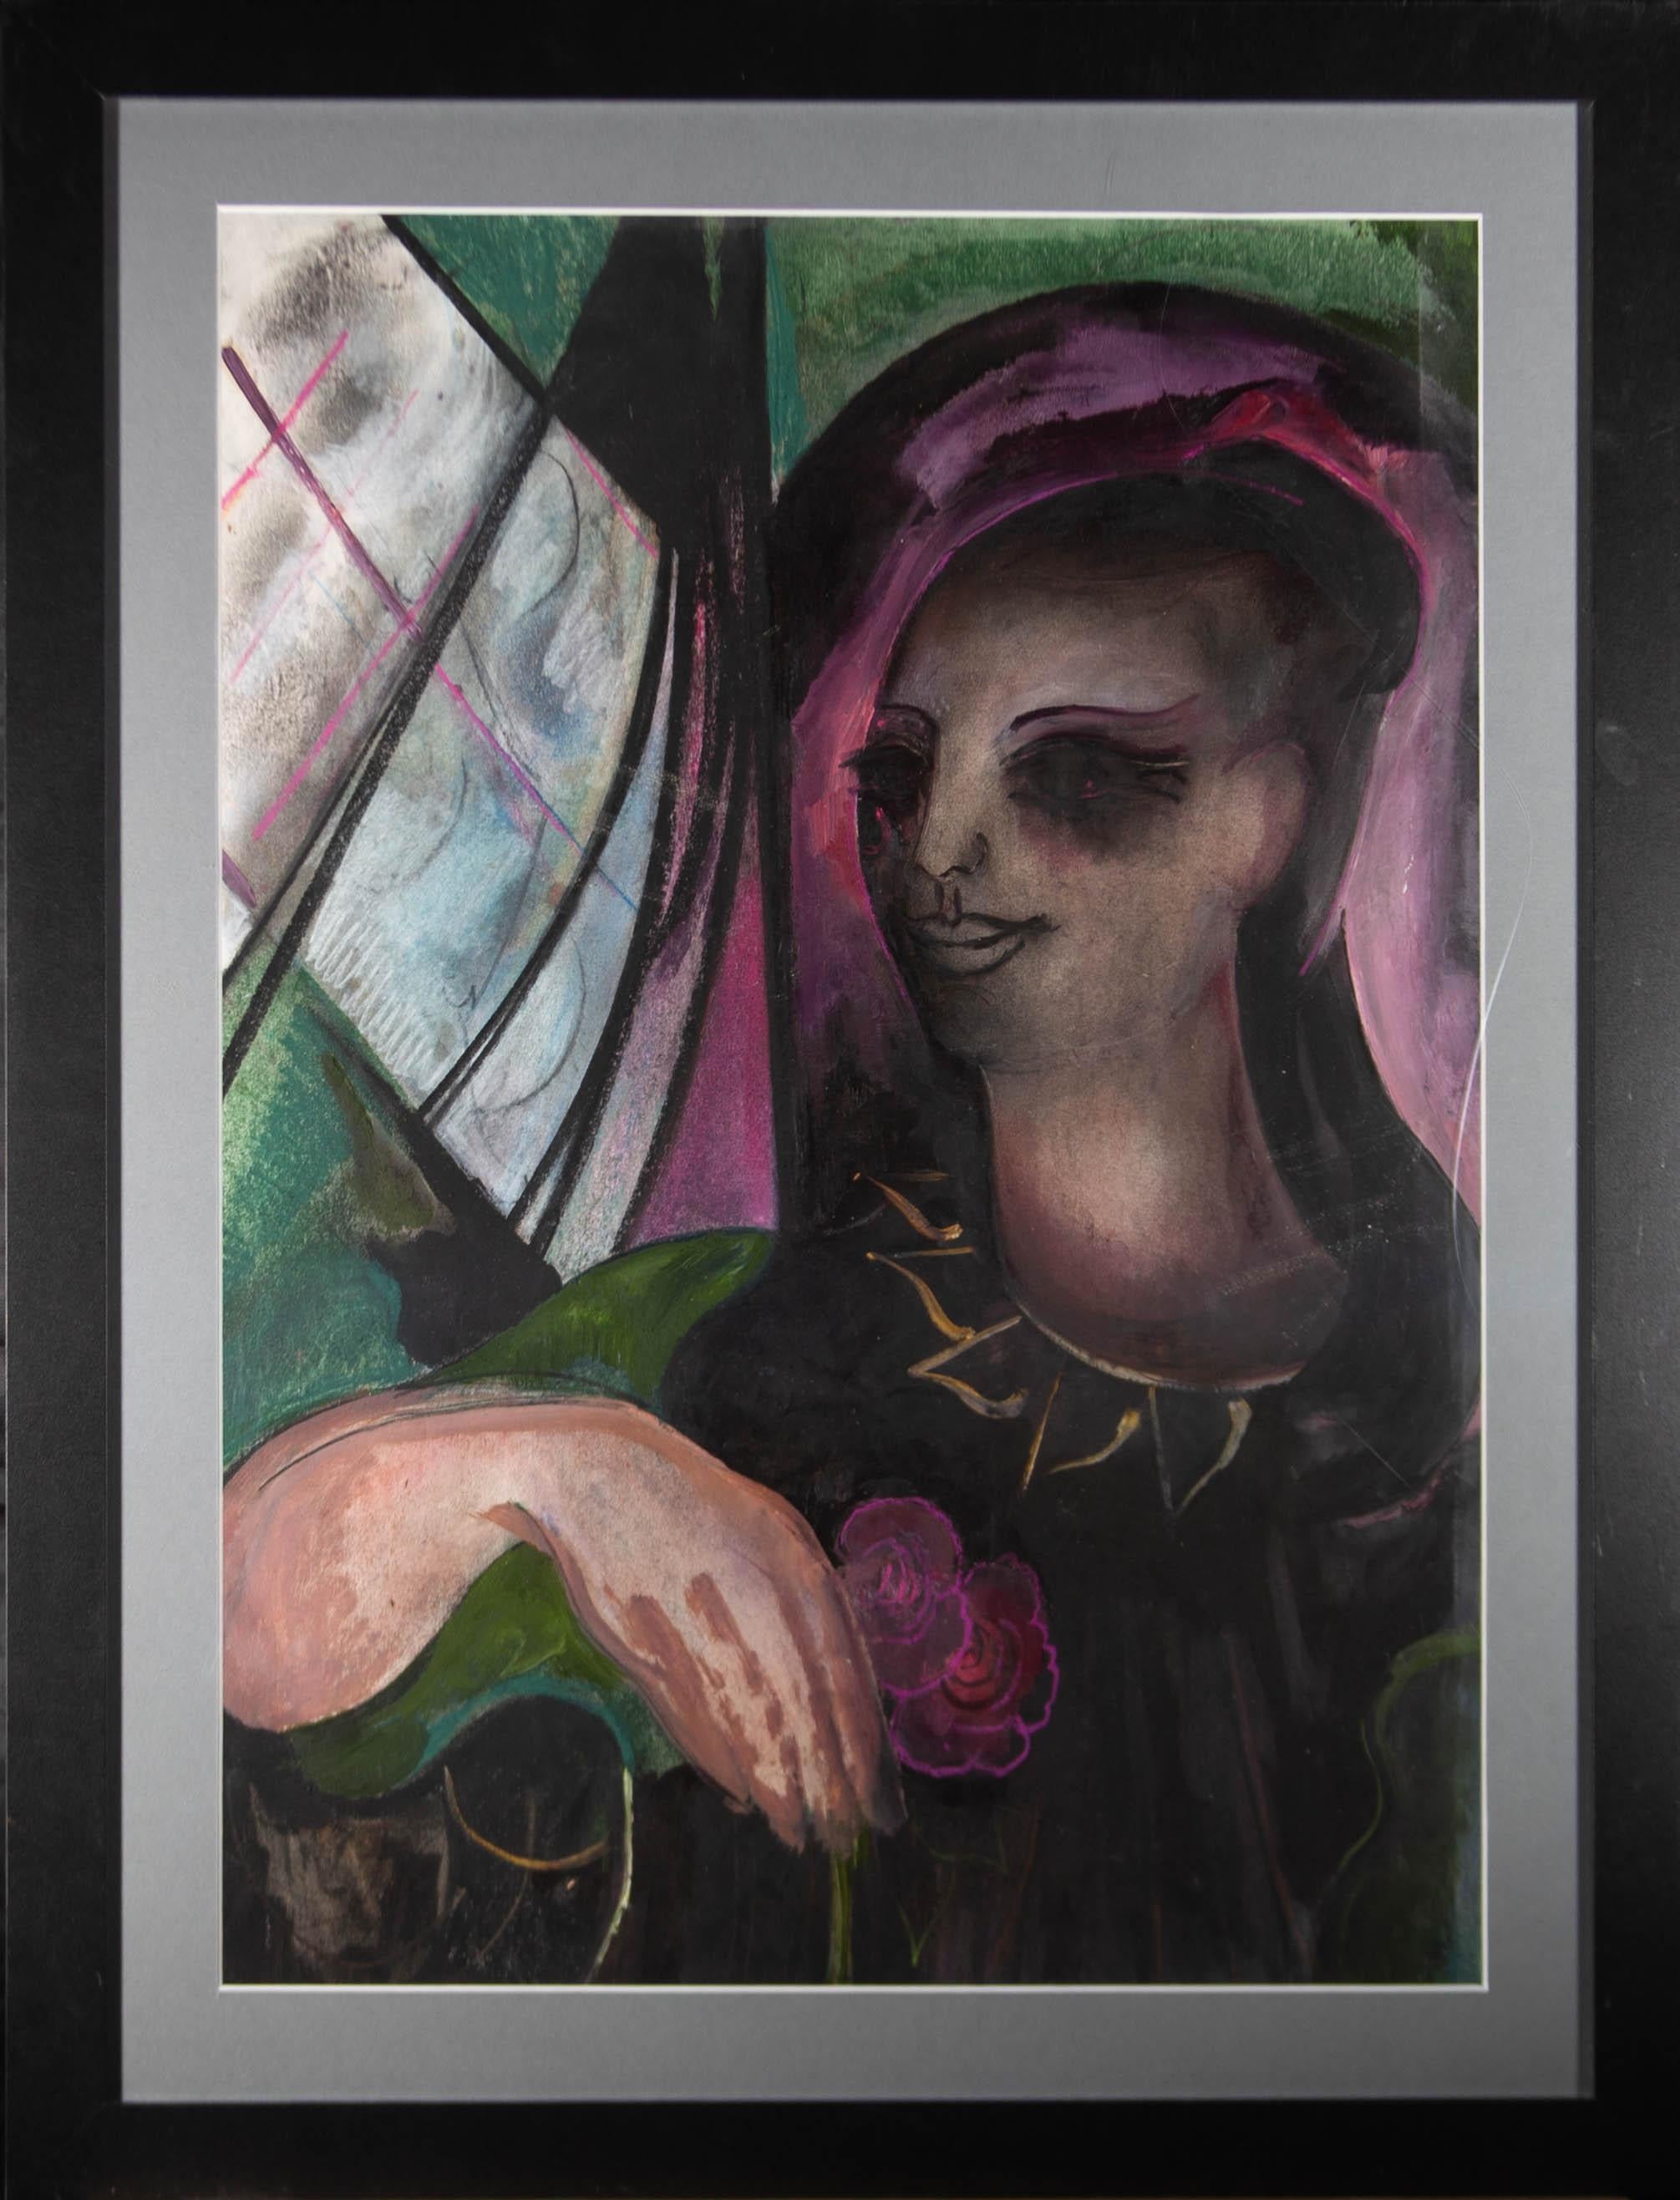 Bold magentas and vivid viridians are finished with charcoal and gouache to render a portrait full of mystic expression in Midlane's nuanced style. The artwork is unsigned and well presented in a contemporary black frame with a steel blue mount.

On